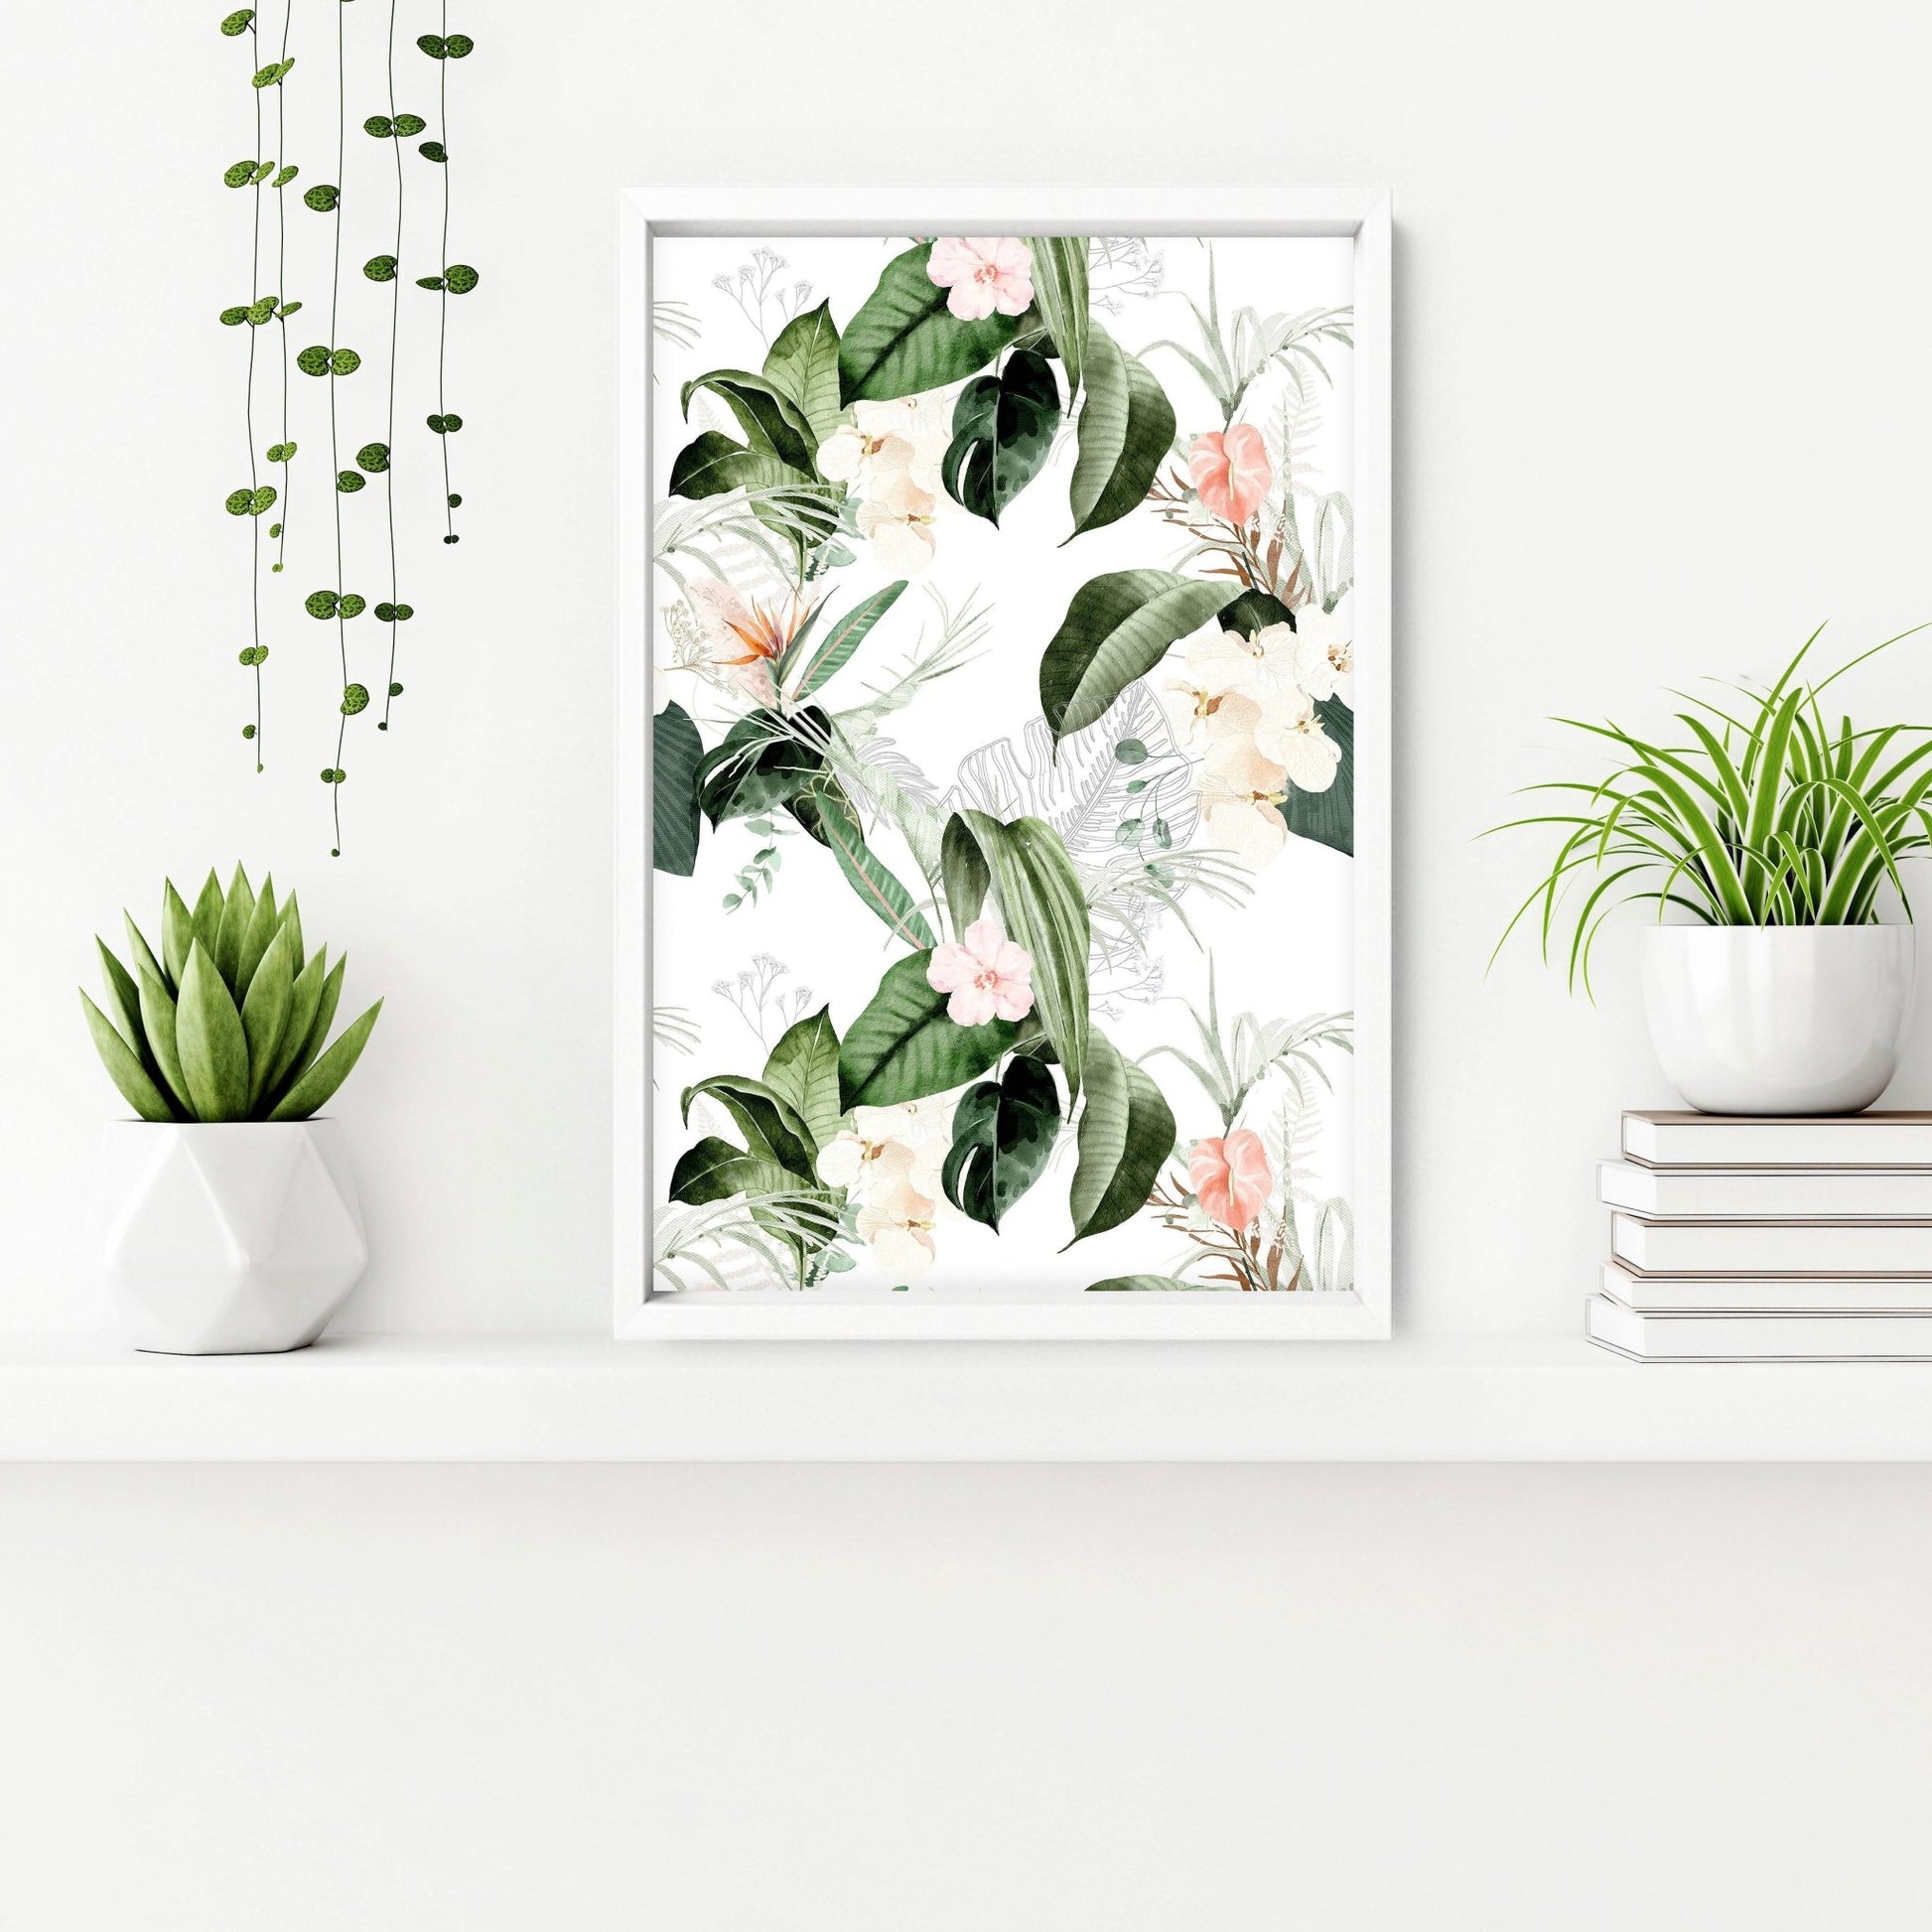 Tropical bathroom wall decorations | set of 3 wall art - About Wall Art